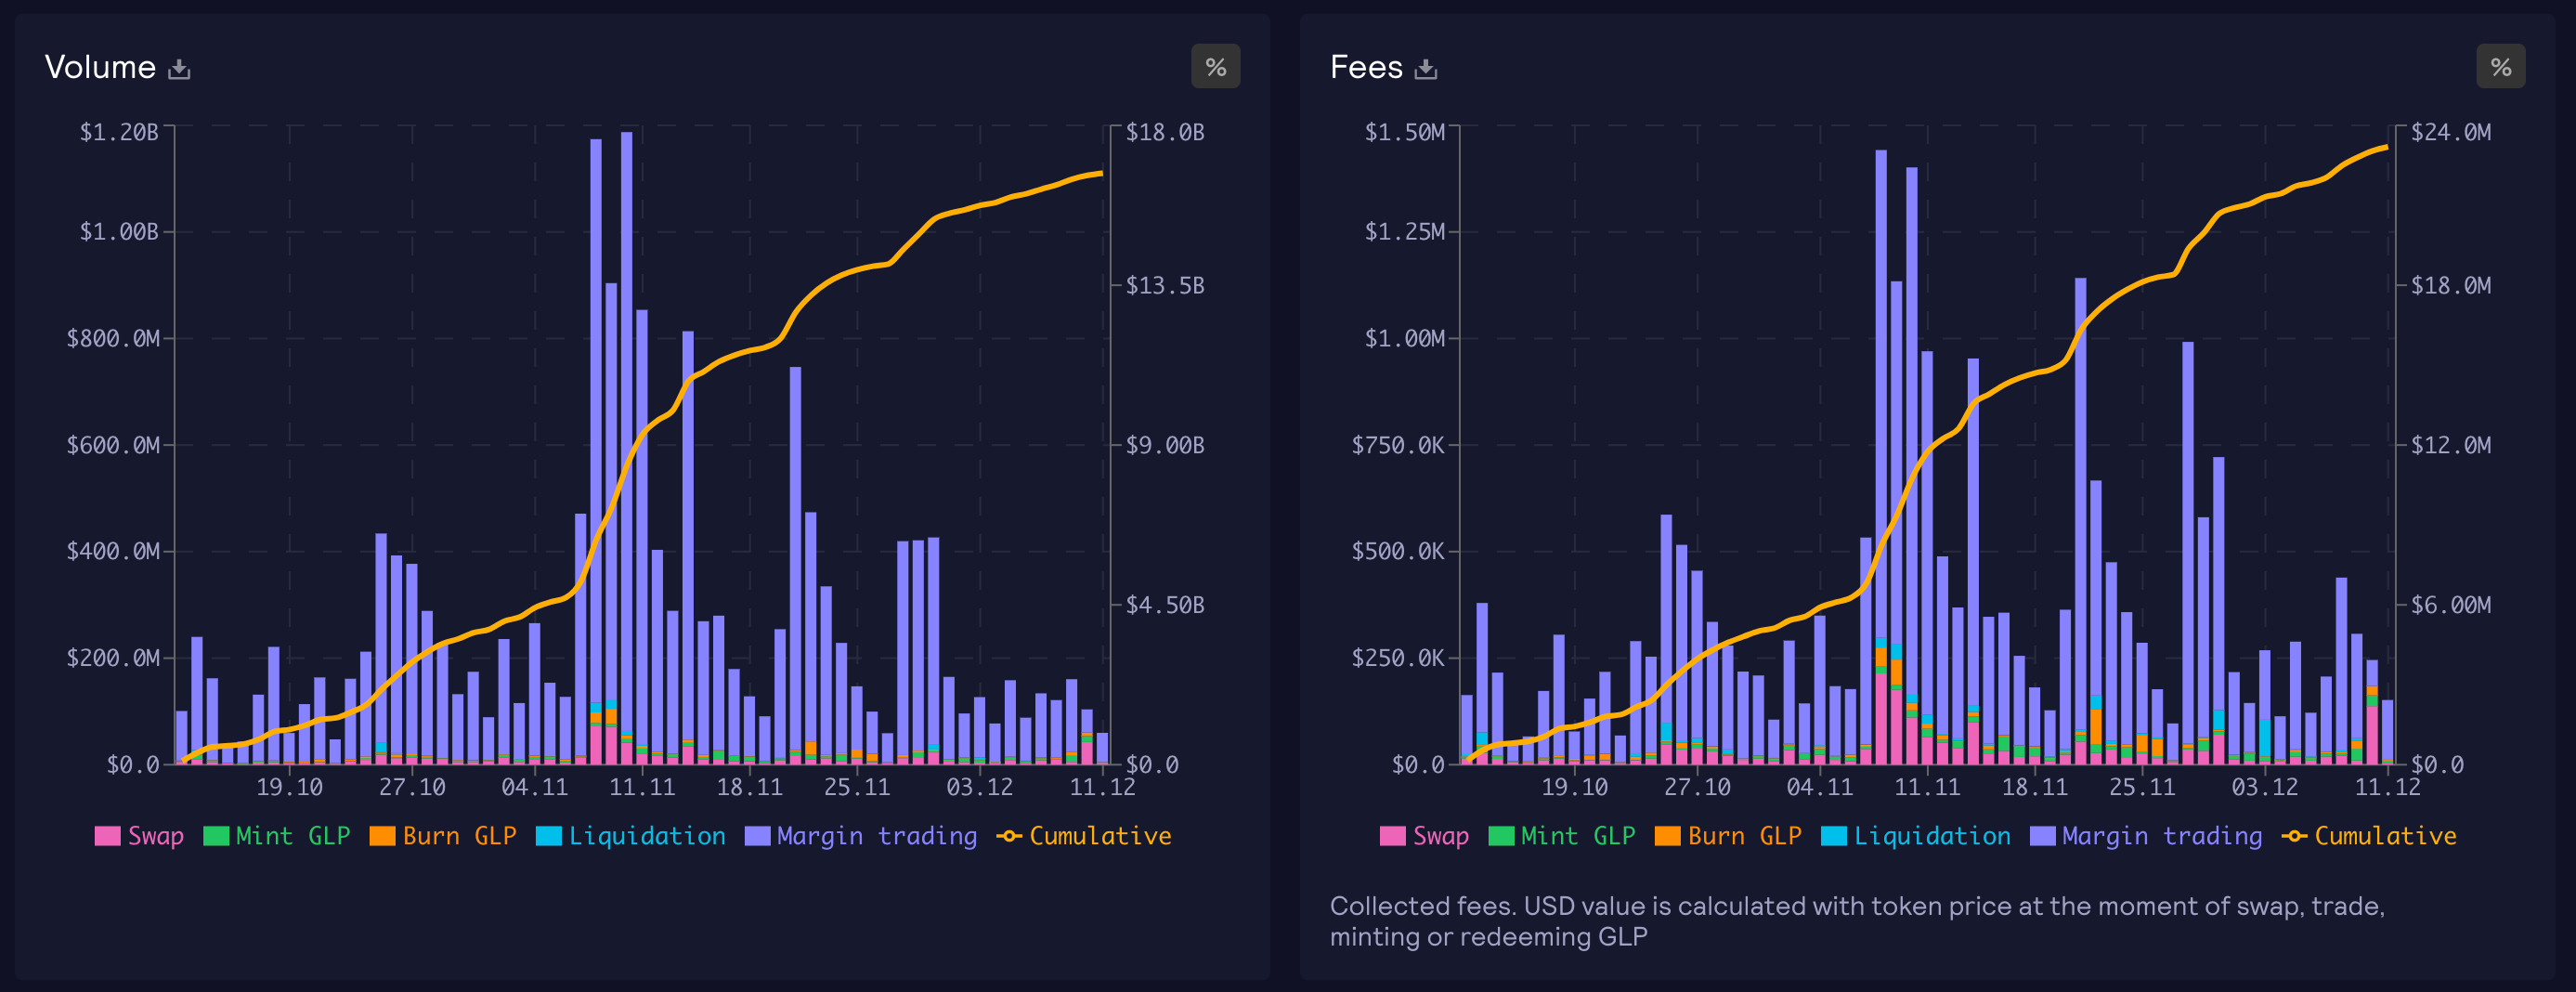 Fees earned by GMX